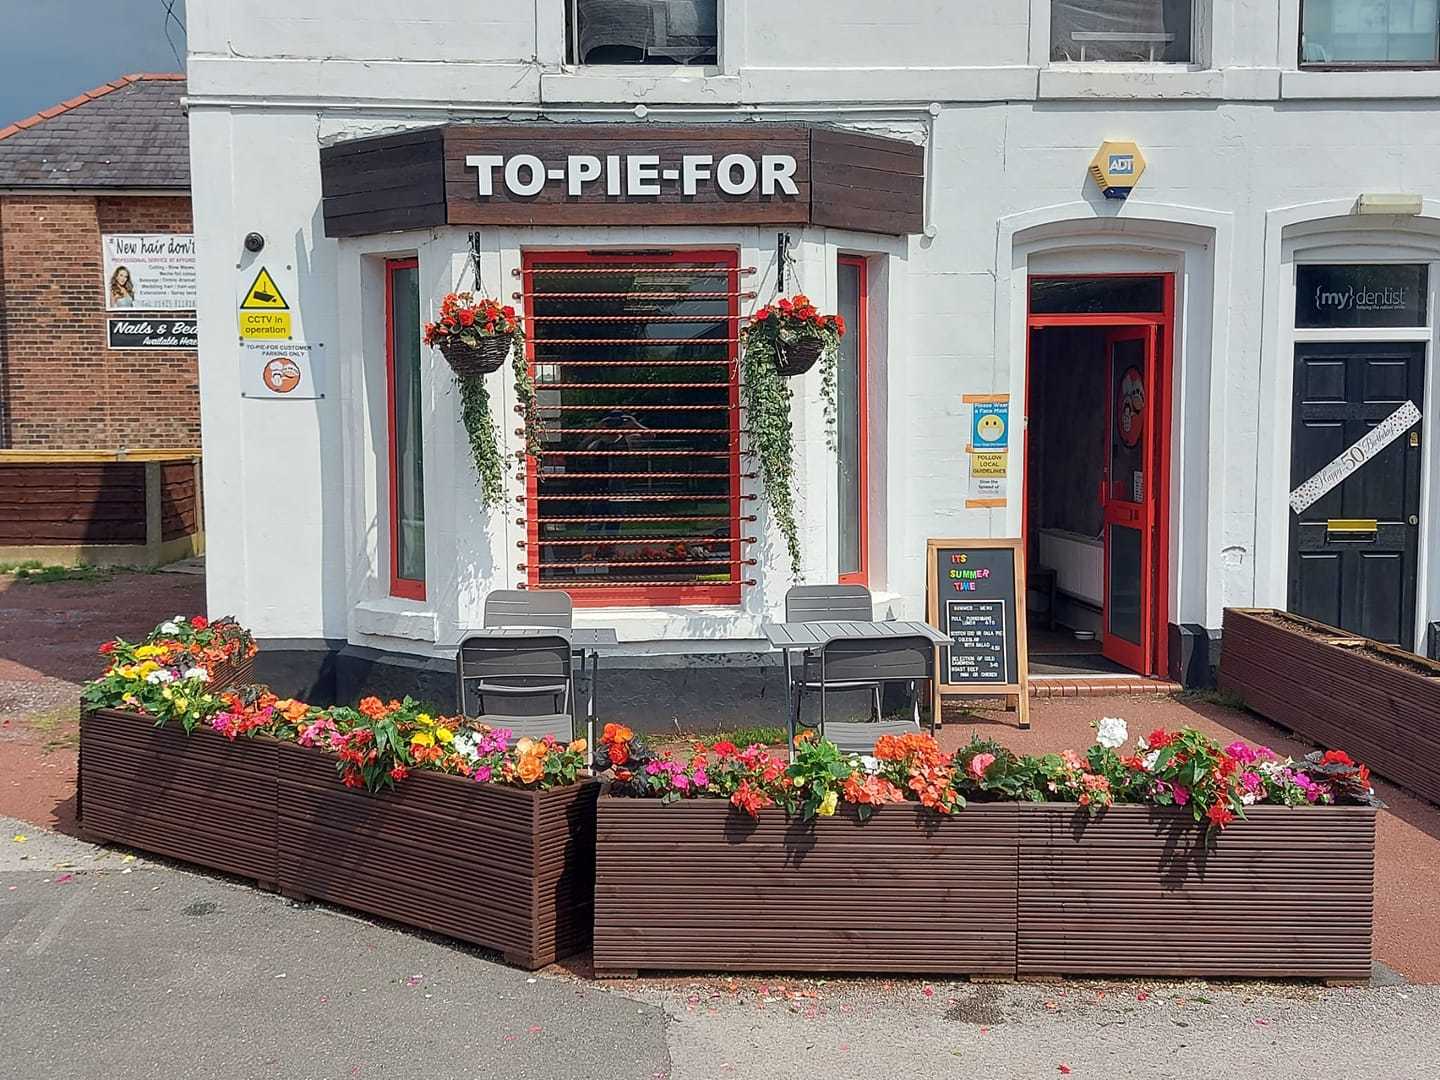 To Pie For opened on Station Road North in Fearnhead in 2019